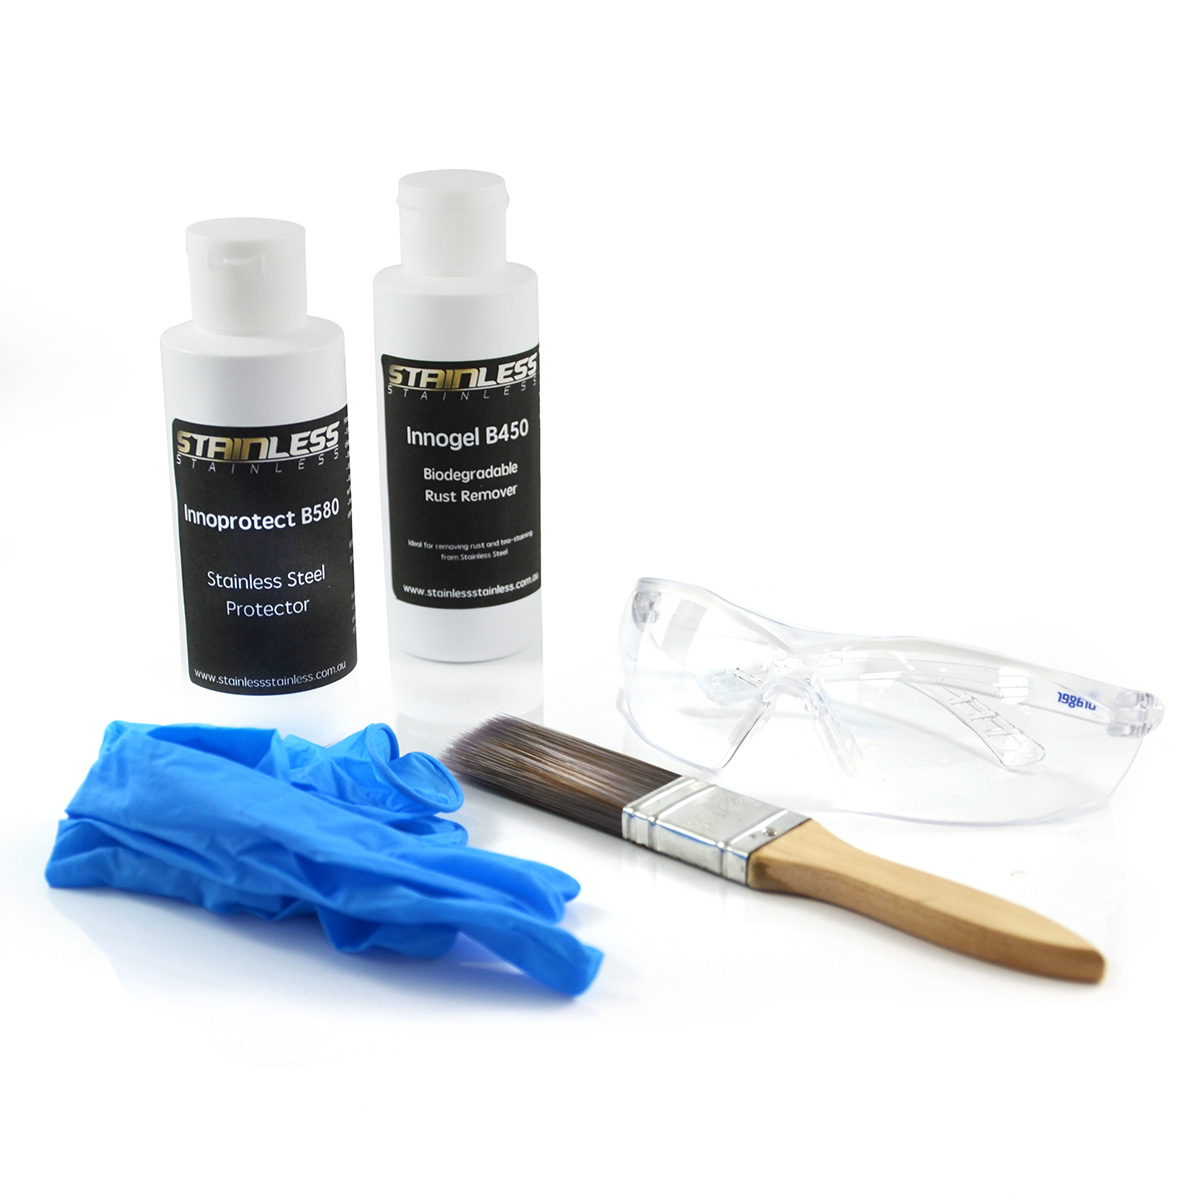 Aftercare: Cleaning & Protecting